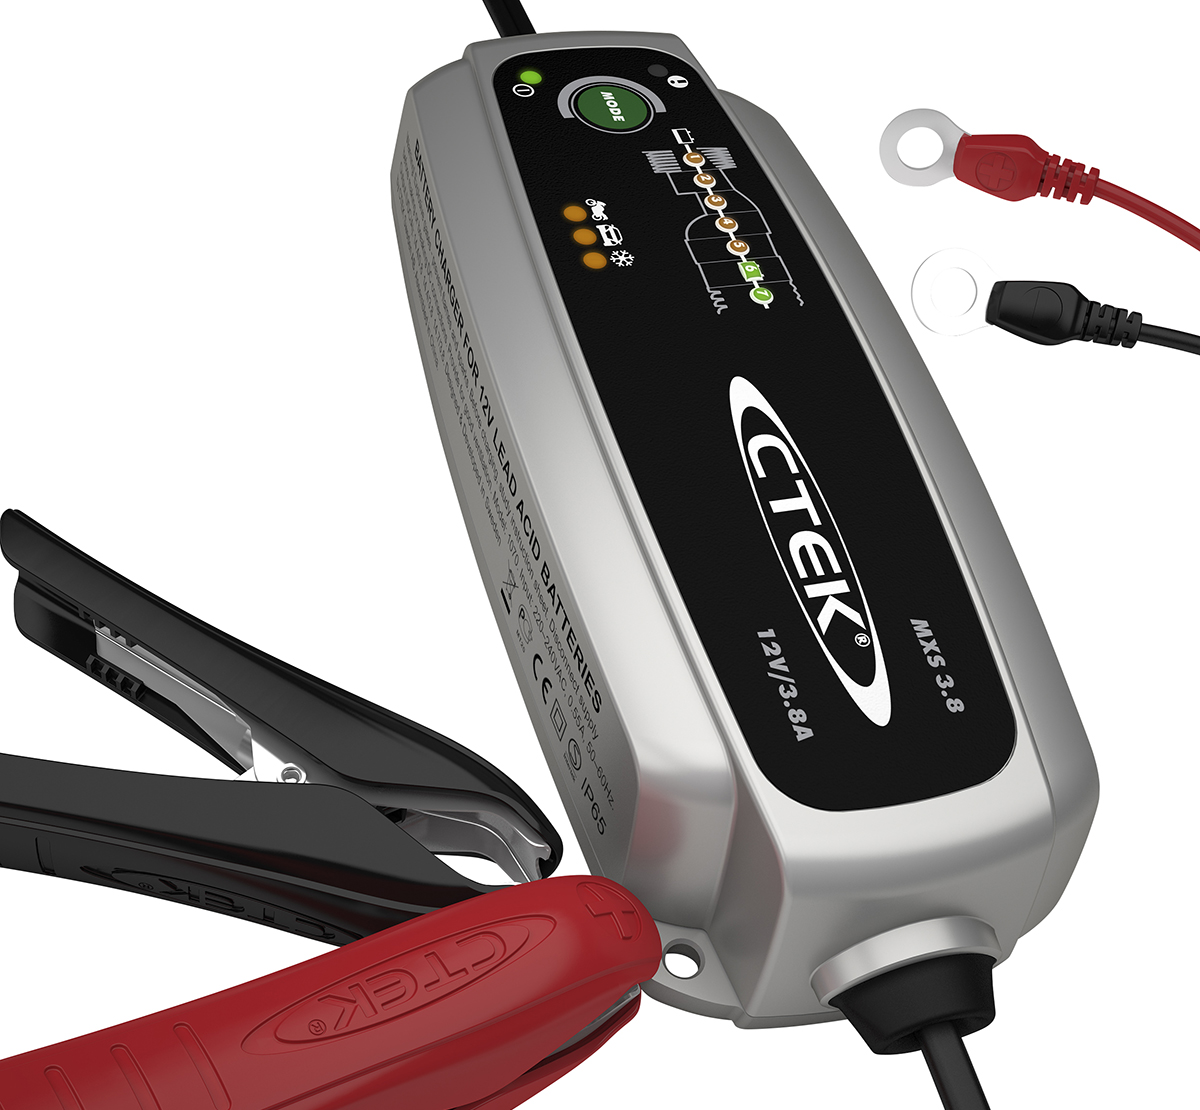 Ctek MXS 3.8 12V Battery Charger for motorcycles and cars